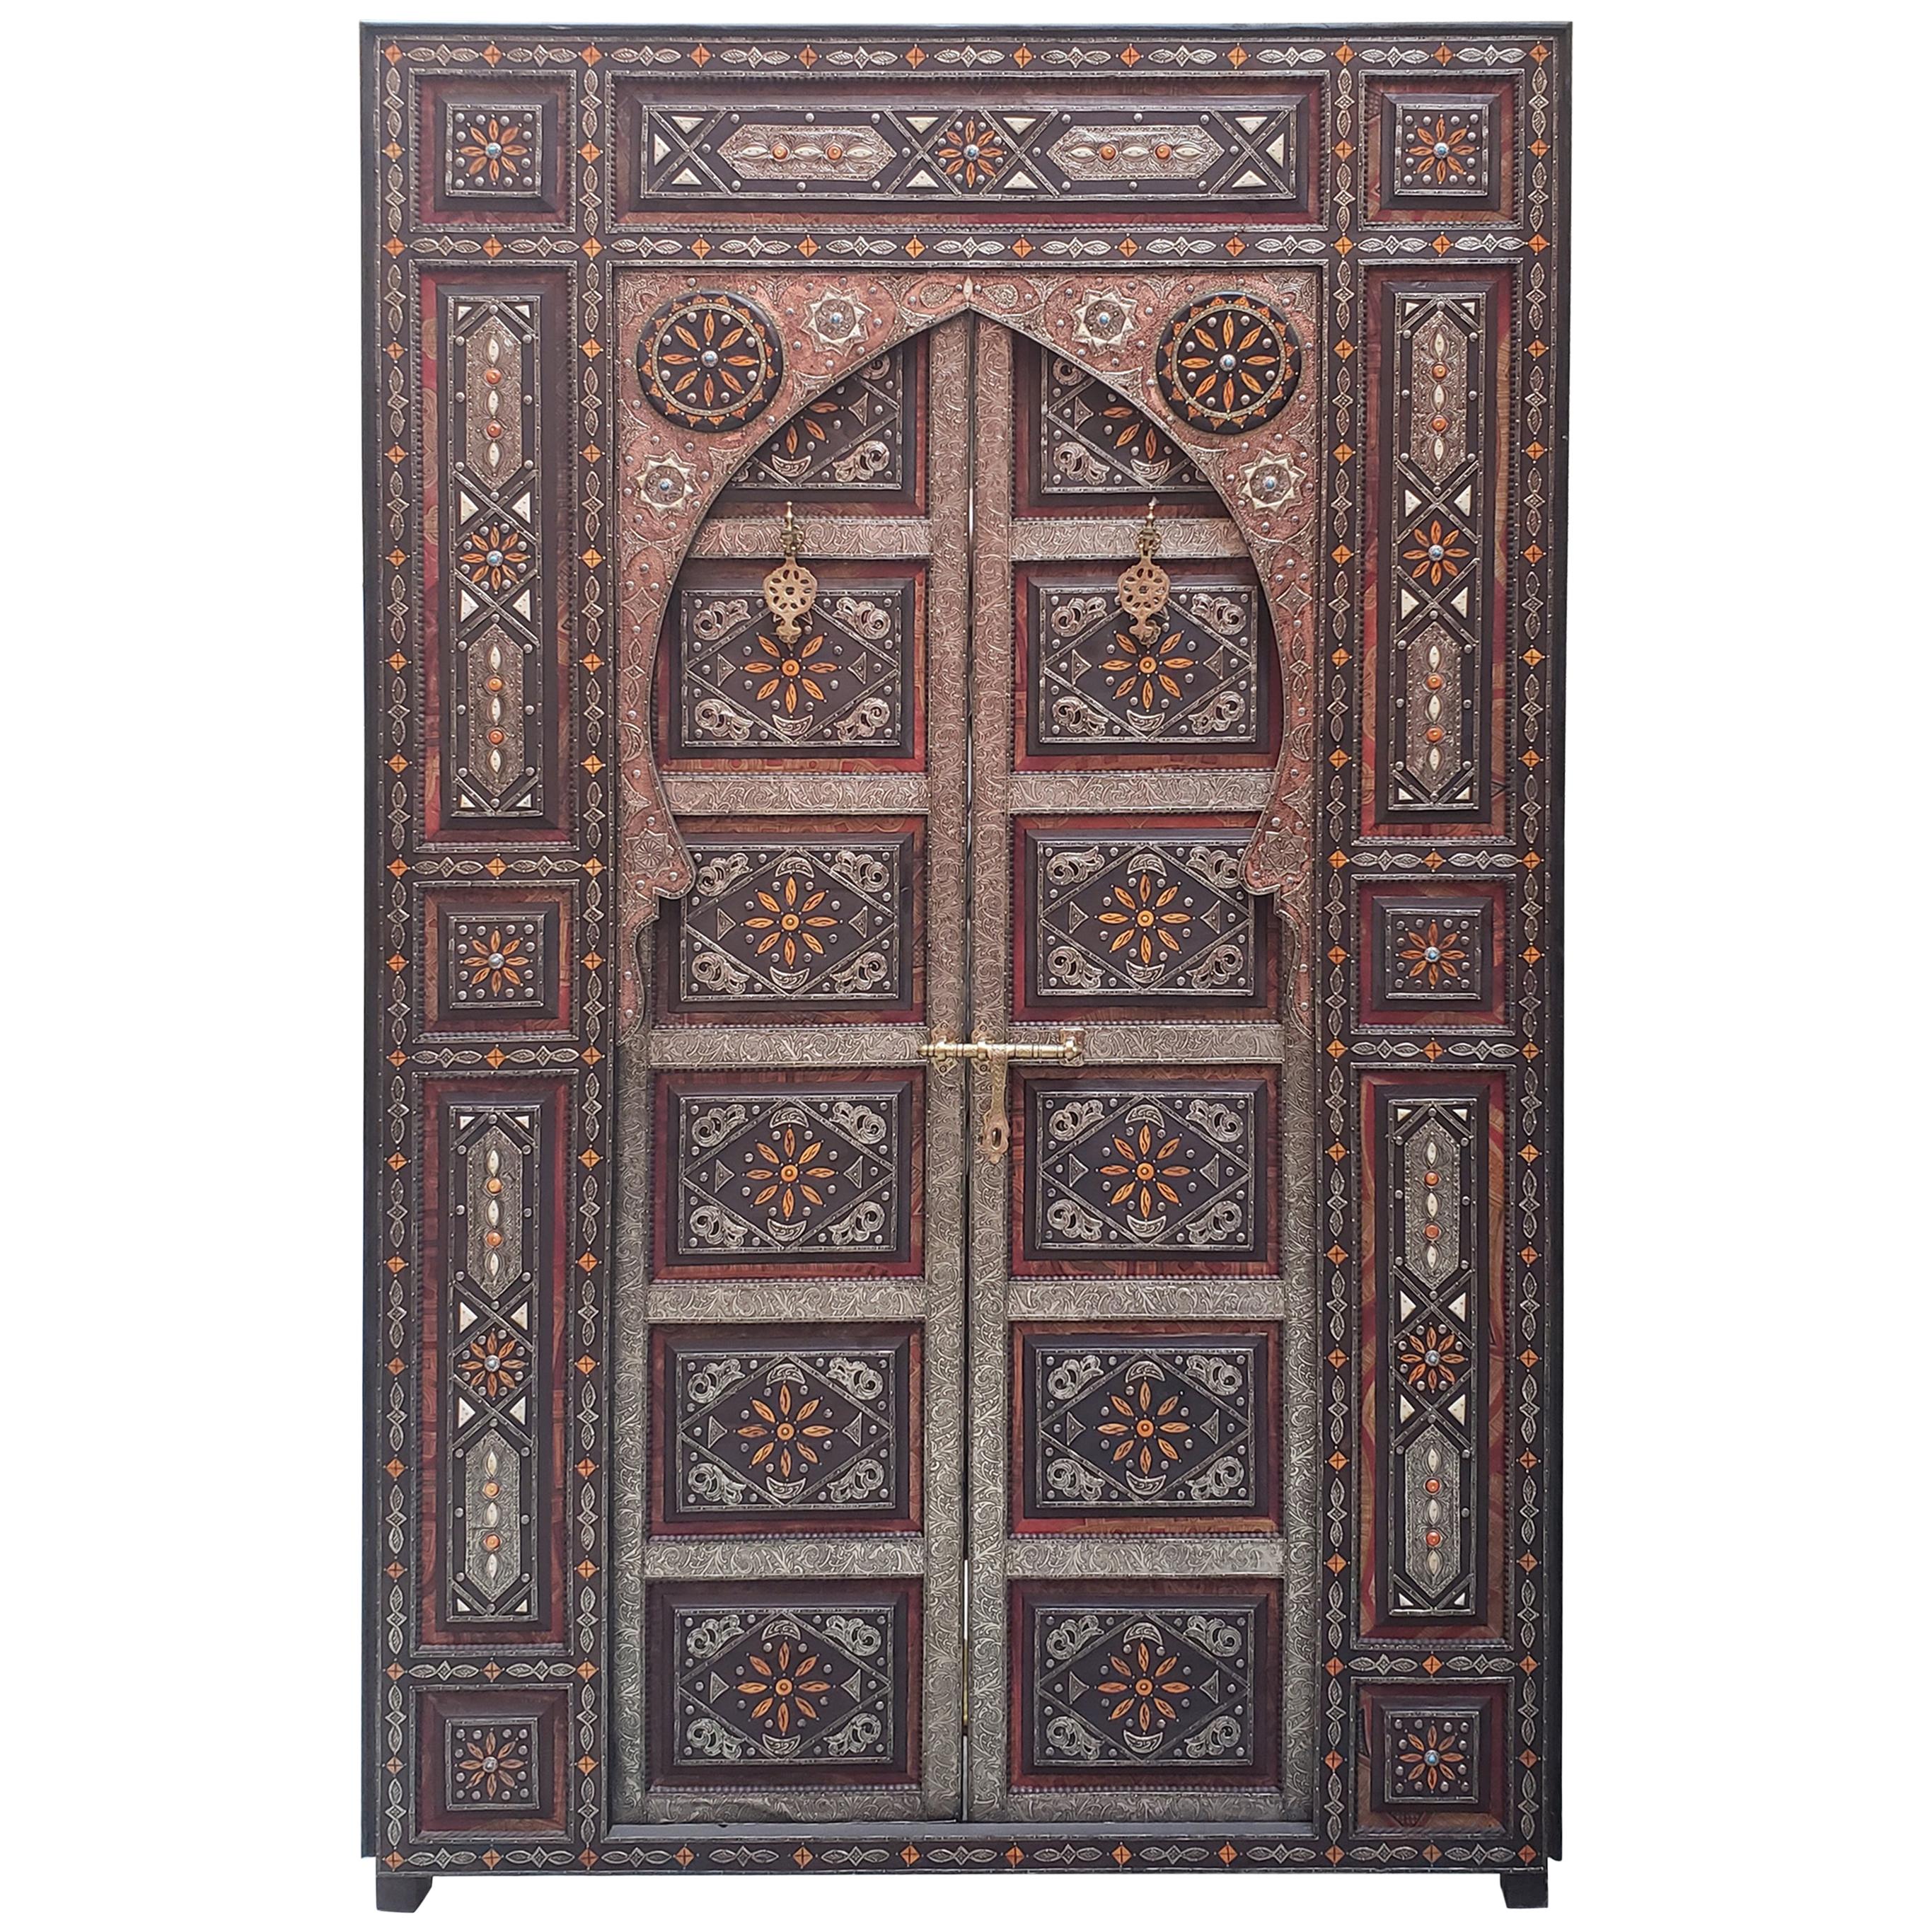 Amazing Chefchaouen Wooden Door All Inlaid, LM24 / 2 For Sale